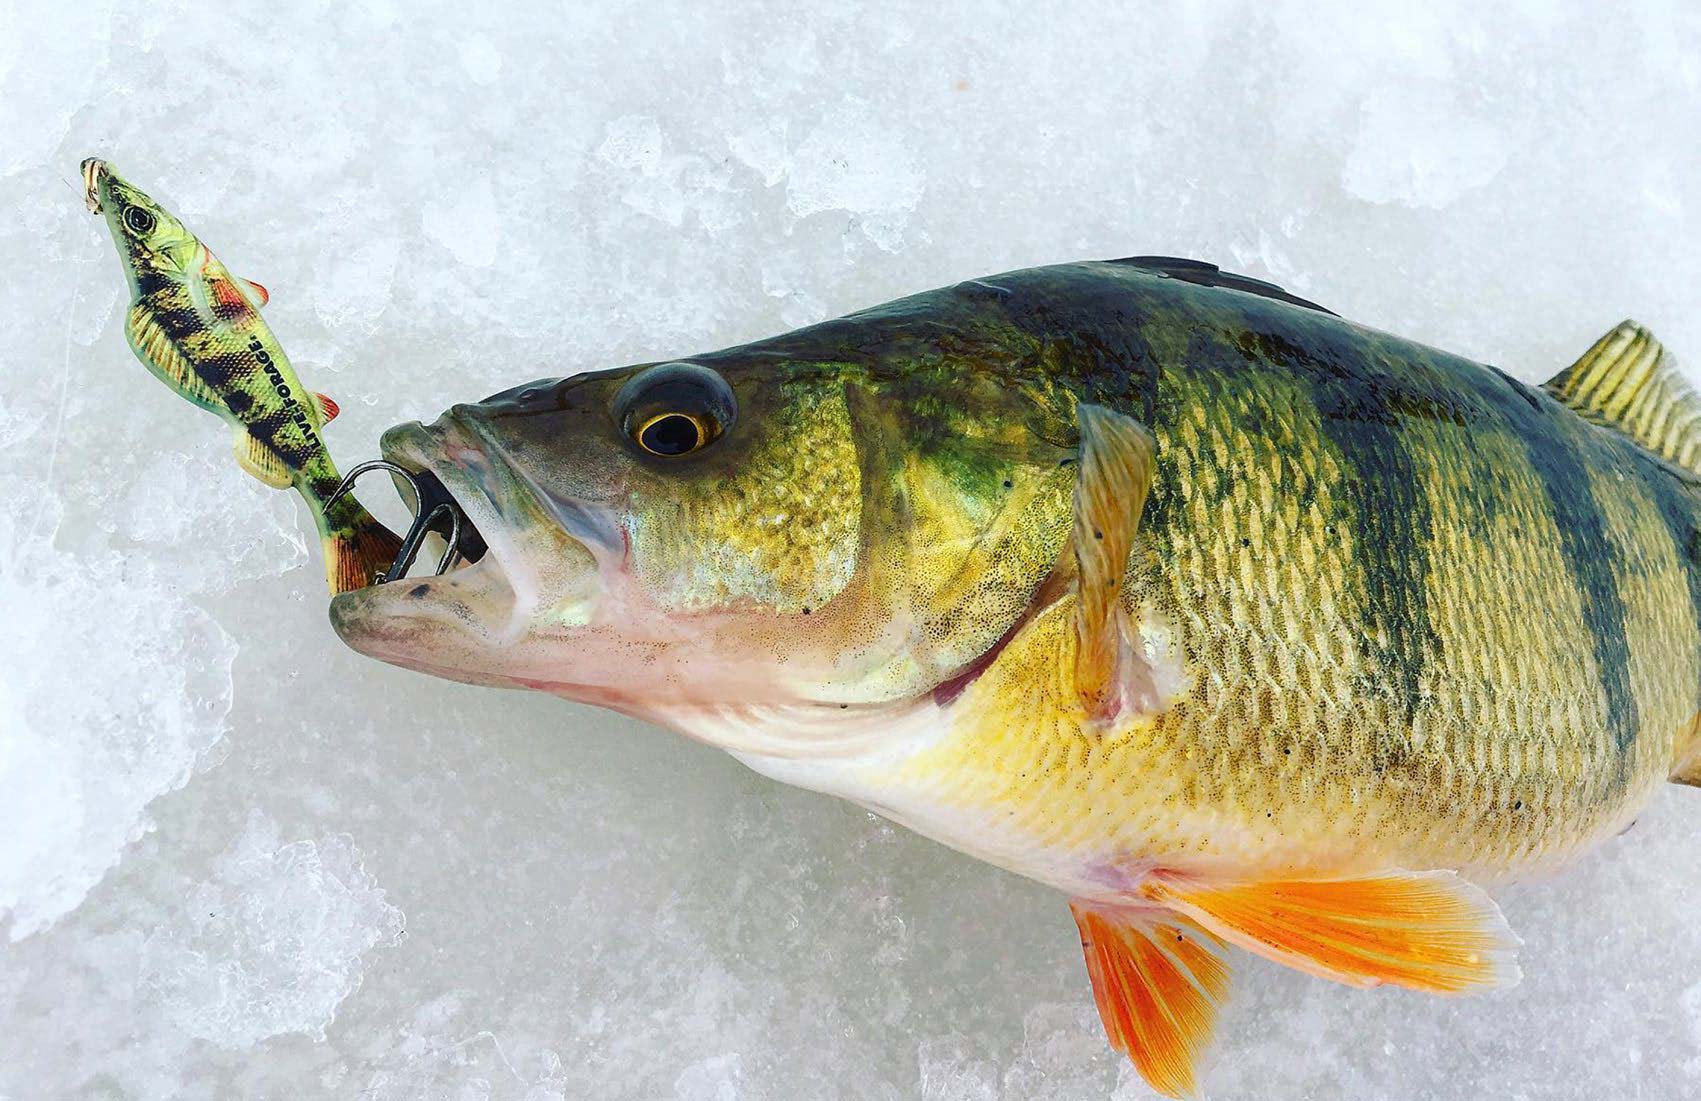 When it comes to jumbo perch fishing, the Fusion is right at home